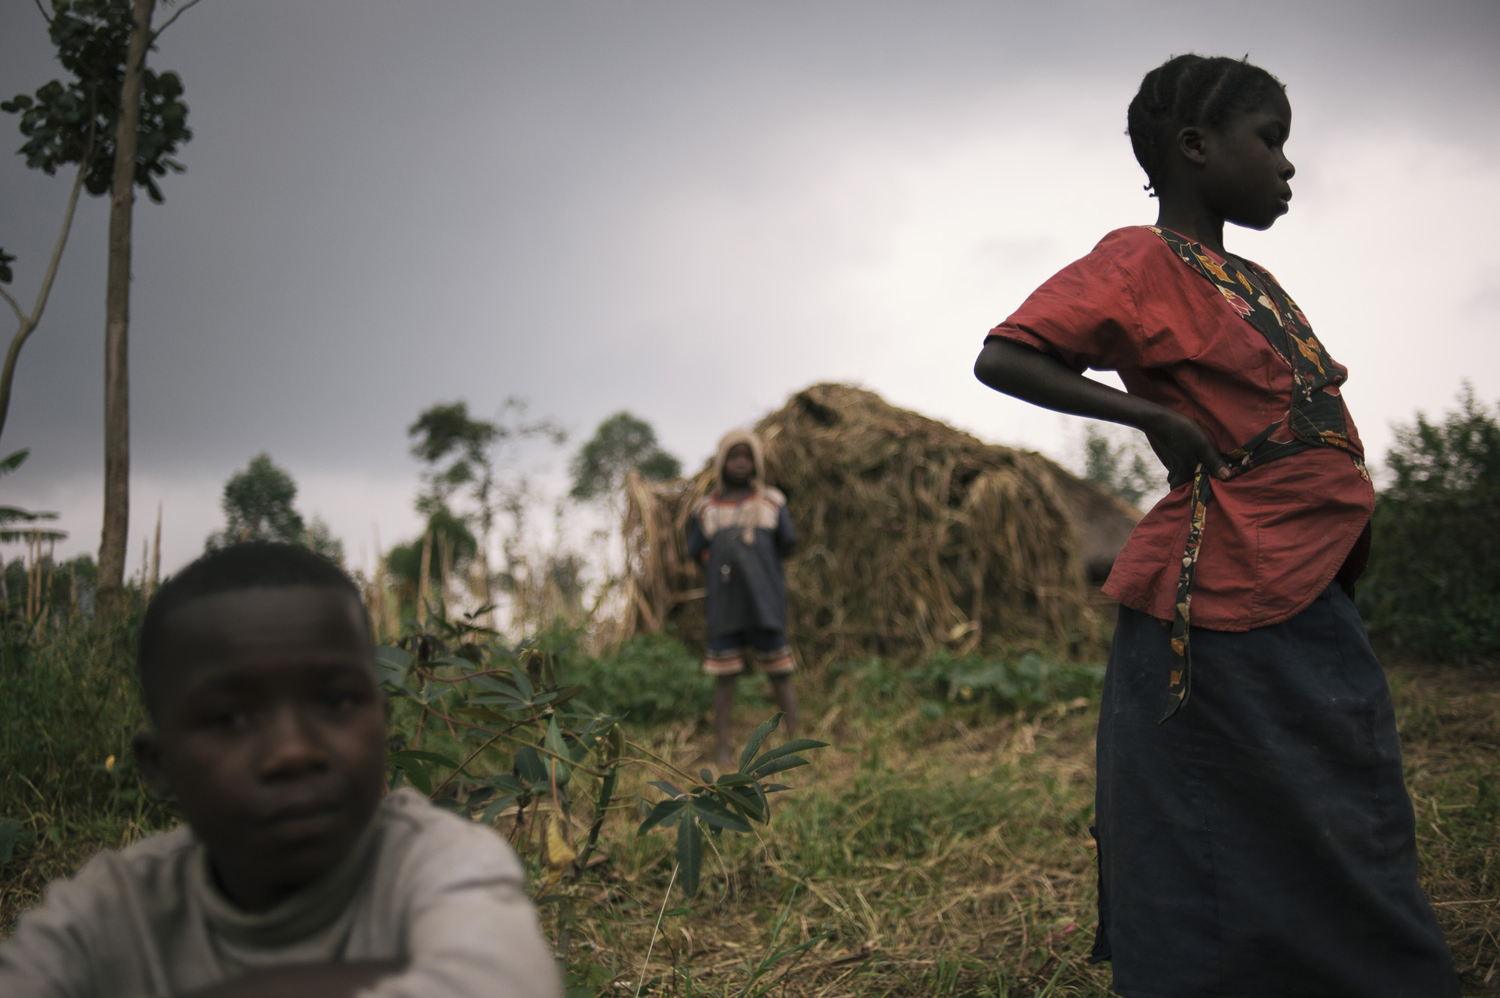 Congolese children stand on the outskirts of Nyabiondo. The town was the scene of heavy fighting earlier this year as government forces battled with APCLS rebels, causing much of the population to flee into the surrounding forest, July 21, 2014.